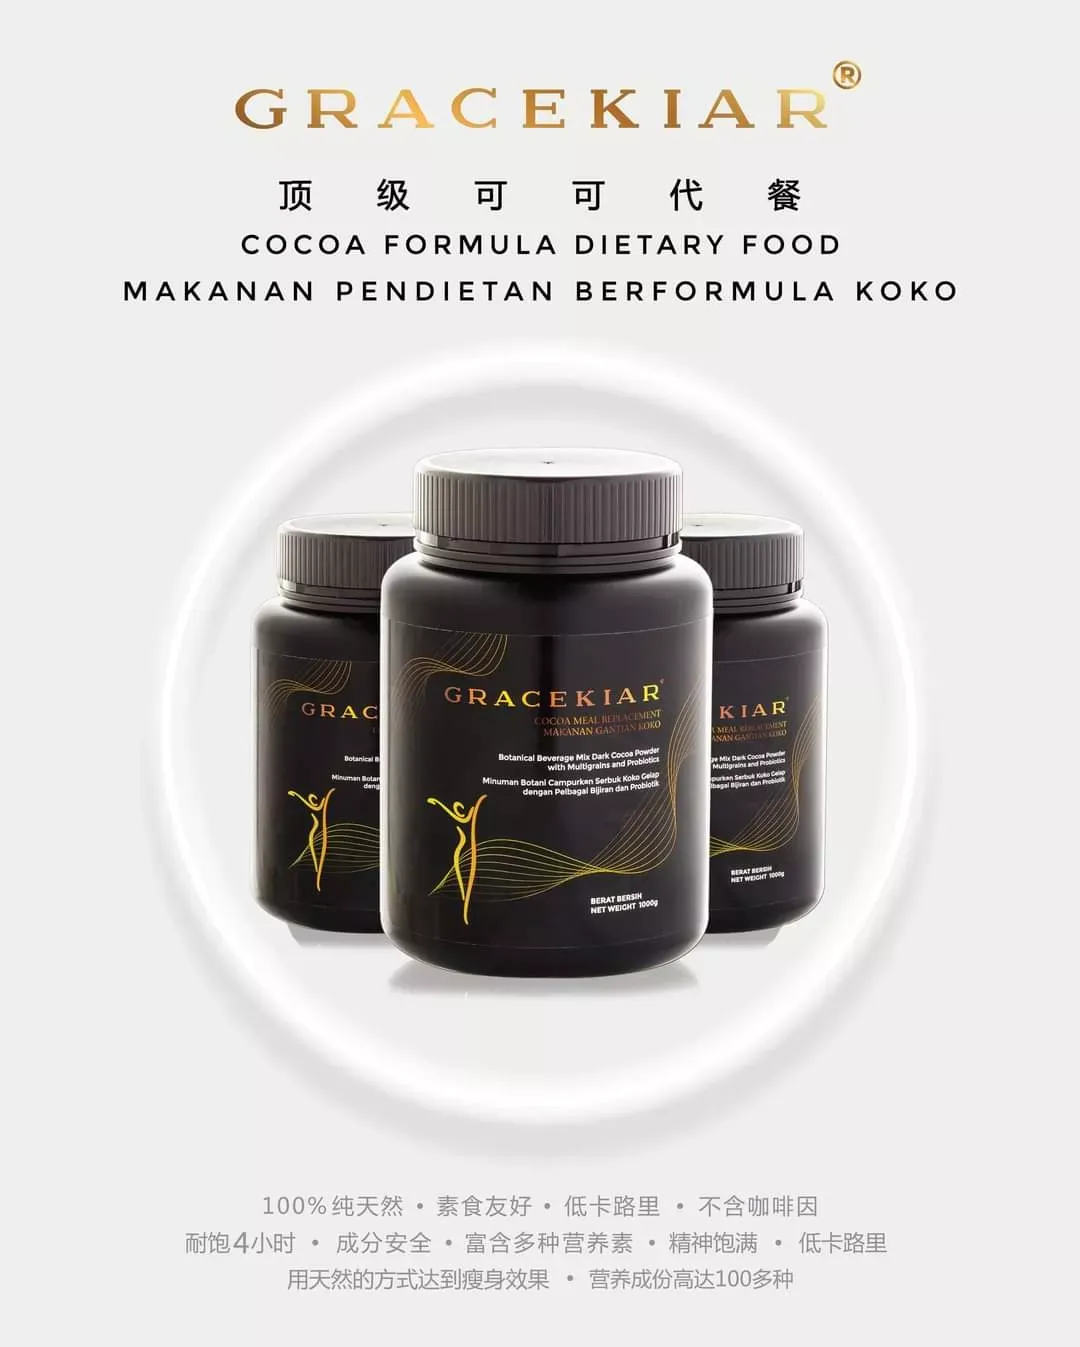 Pad buy RM250 free 1bottles + 1box coco replacement